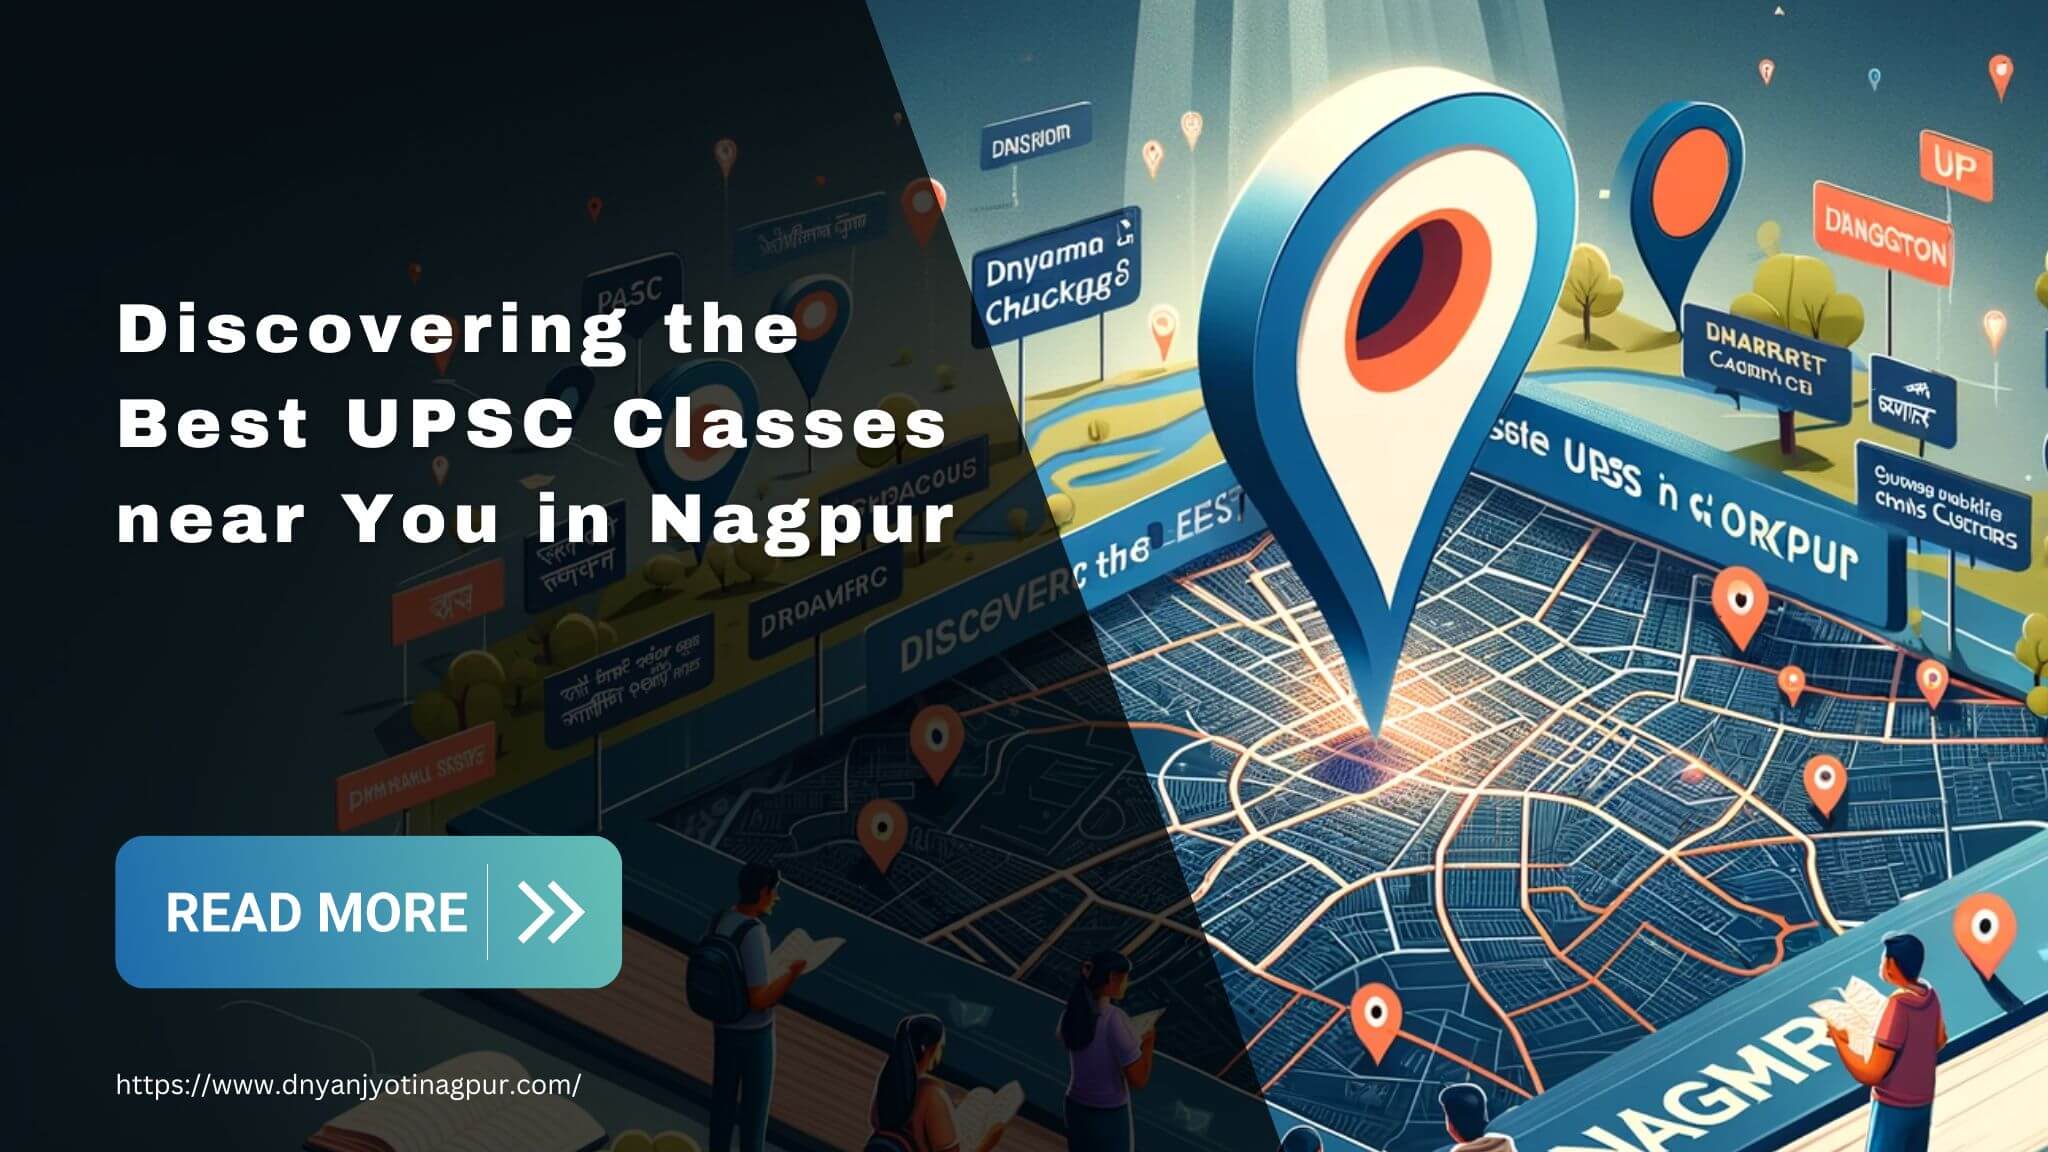 Discovering the Best UPSC Classes near You in Nagpur